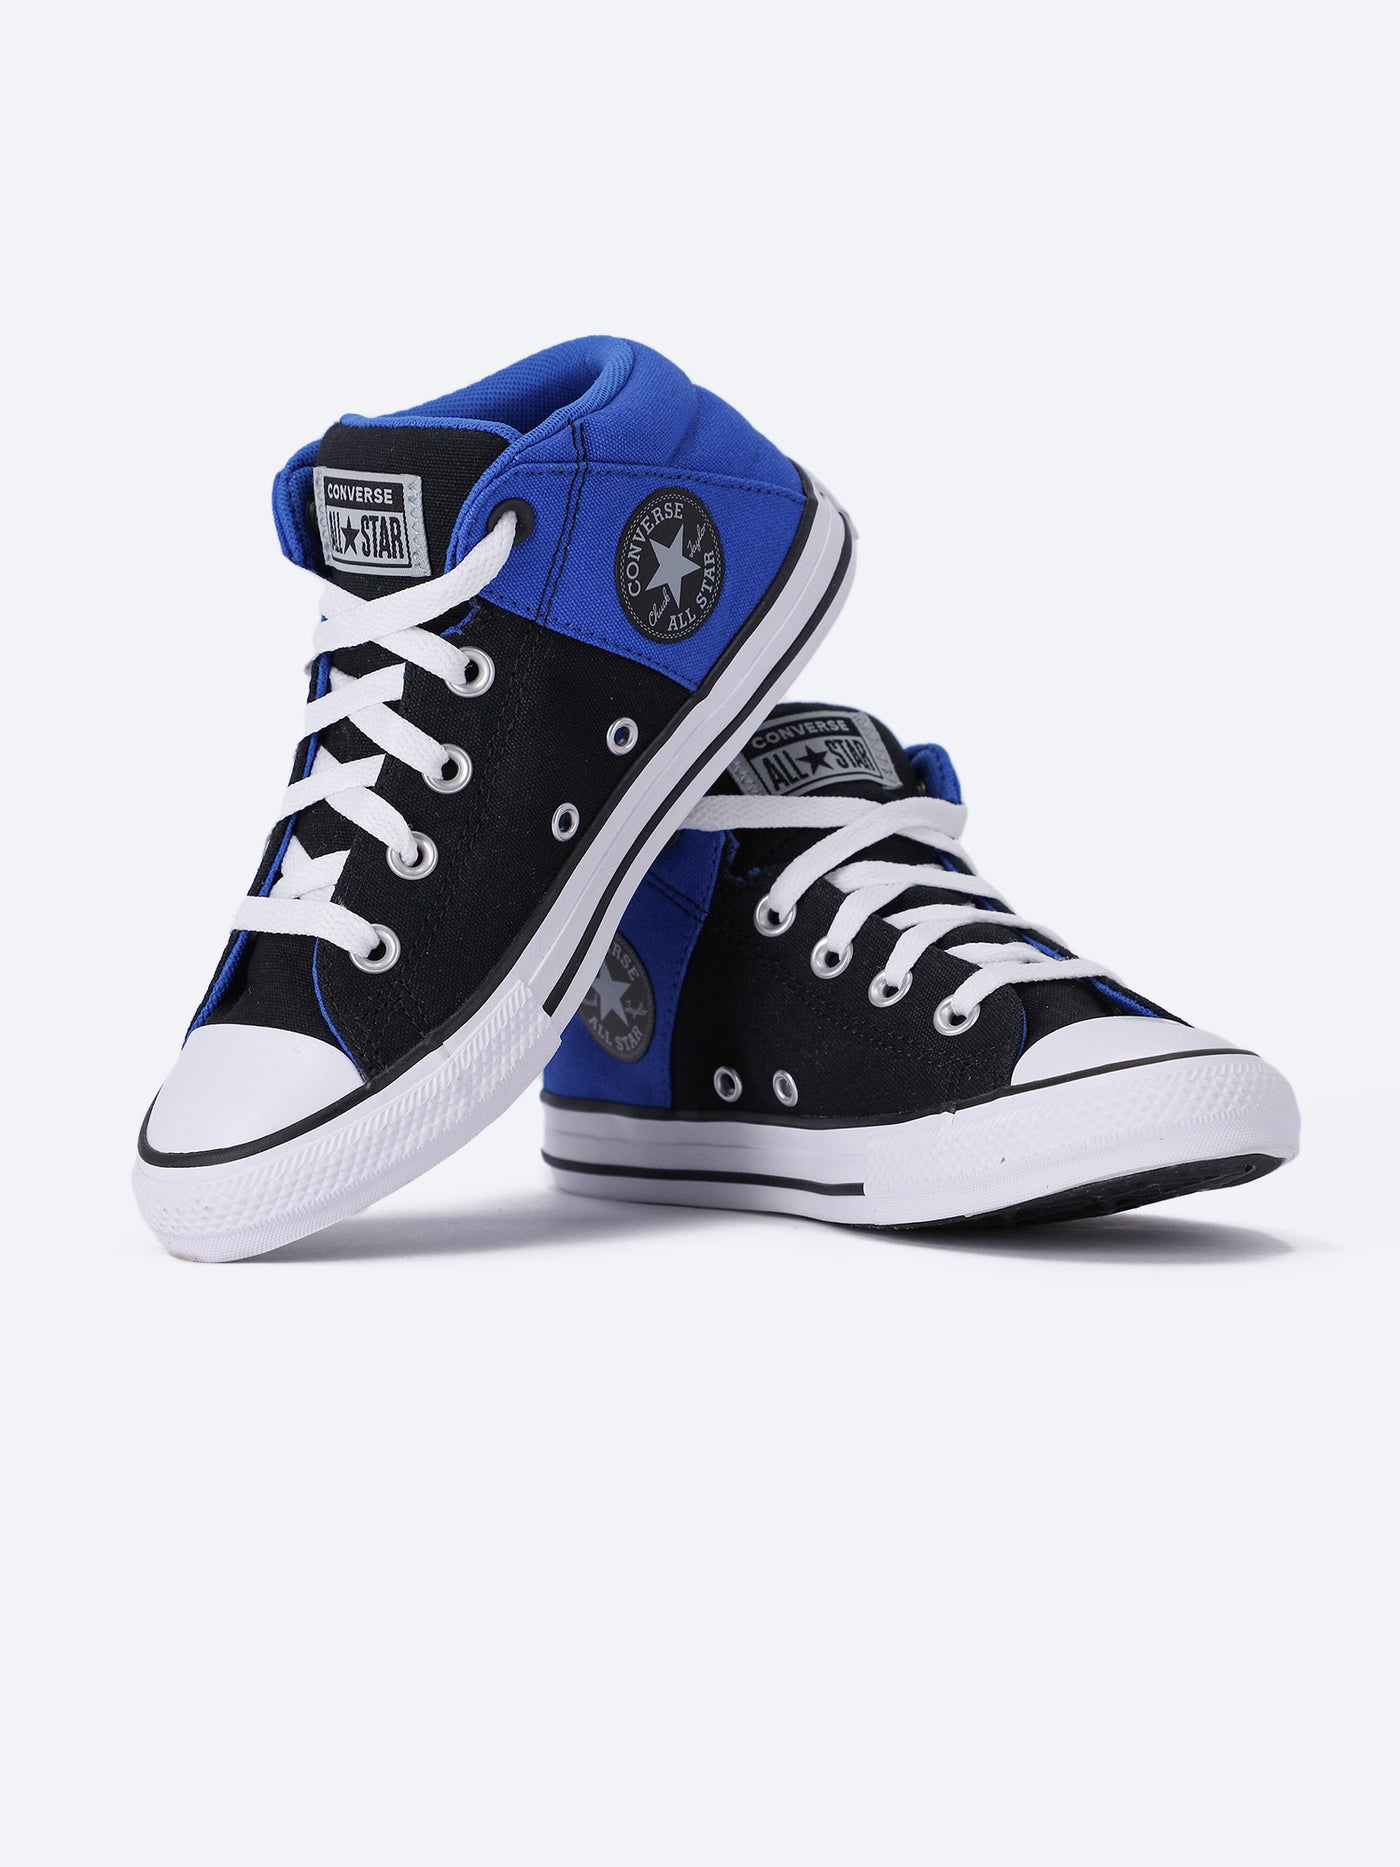 Converse Infants Unisex Chuck Taylor All Star Axel Sneaker Shoes